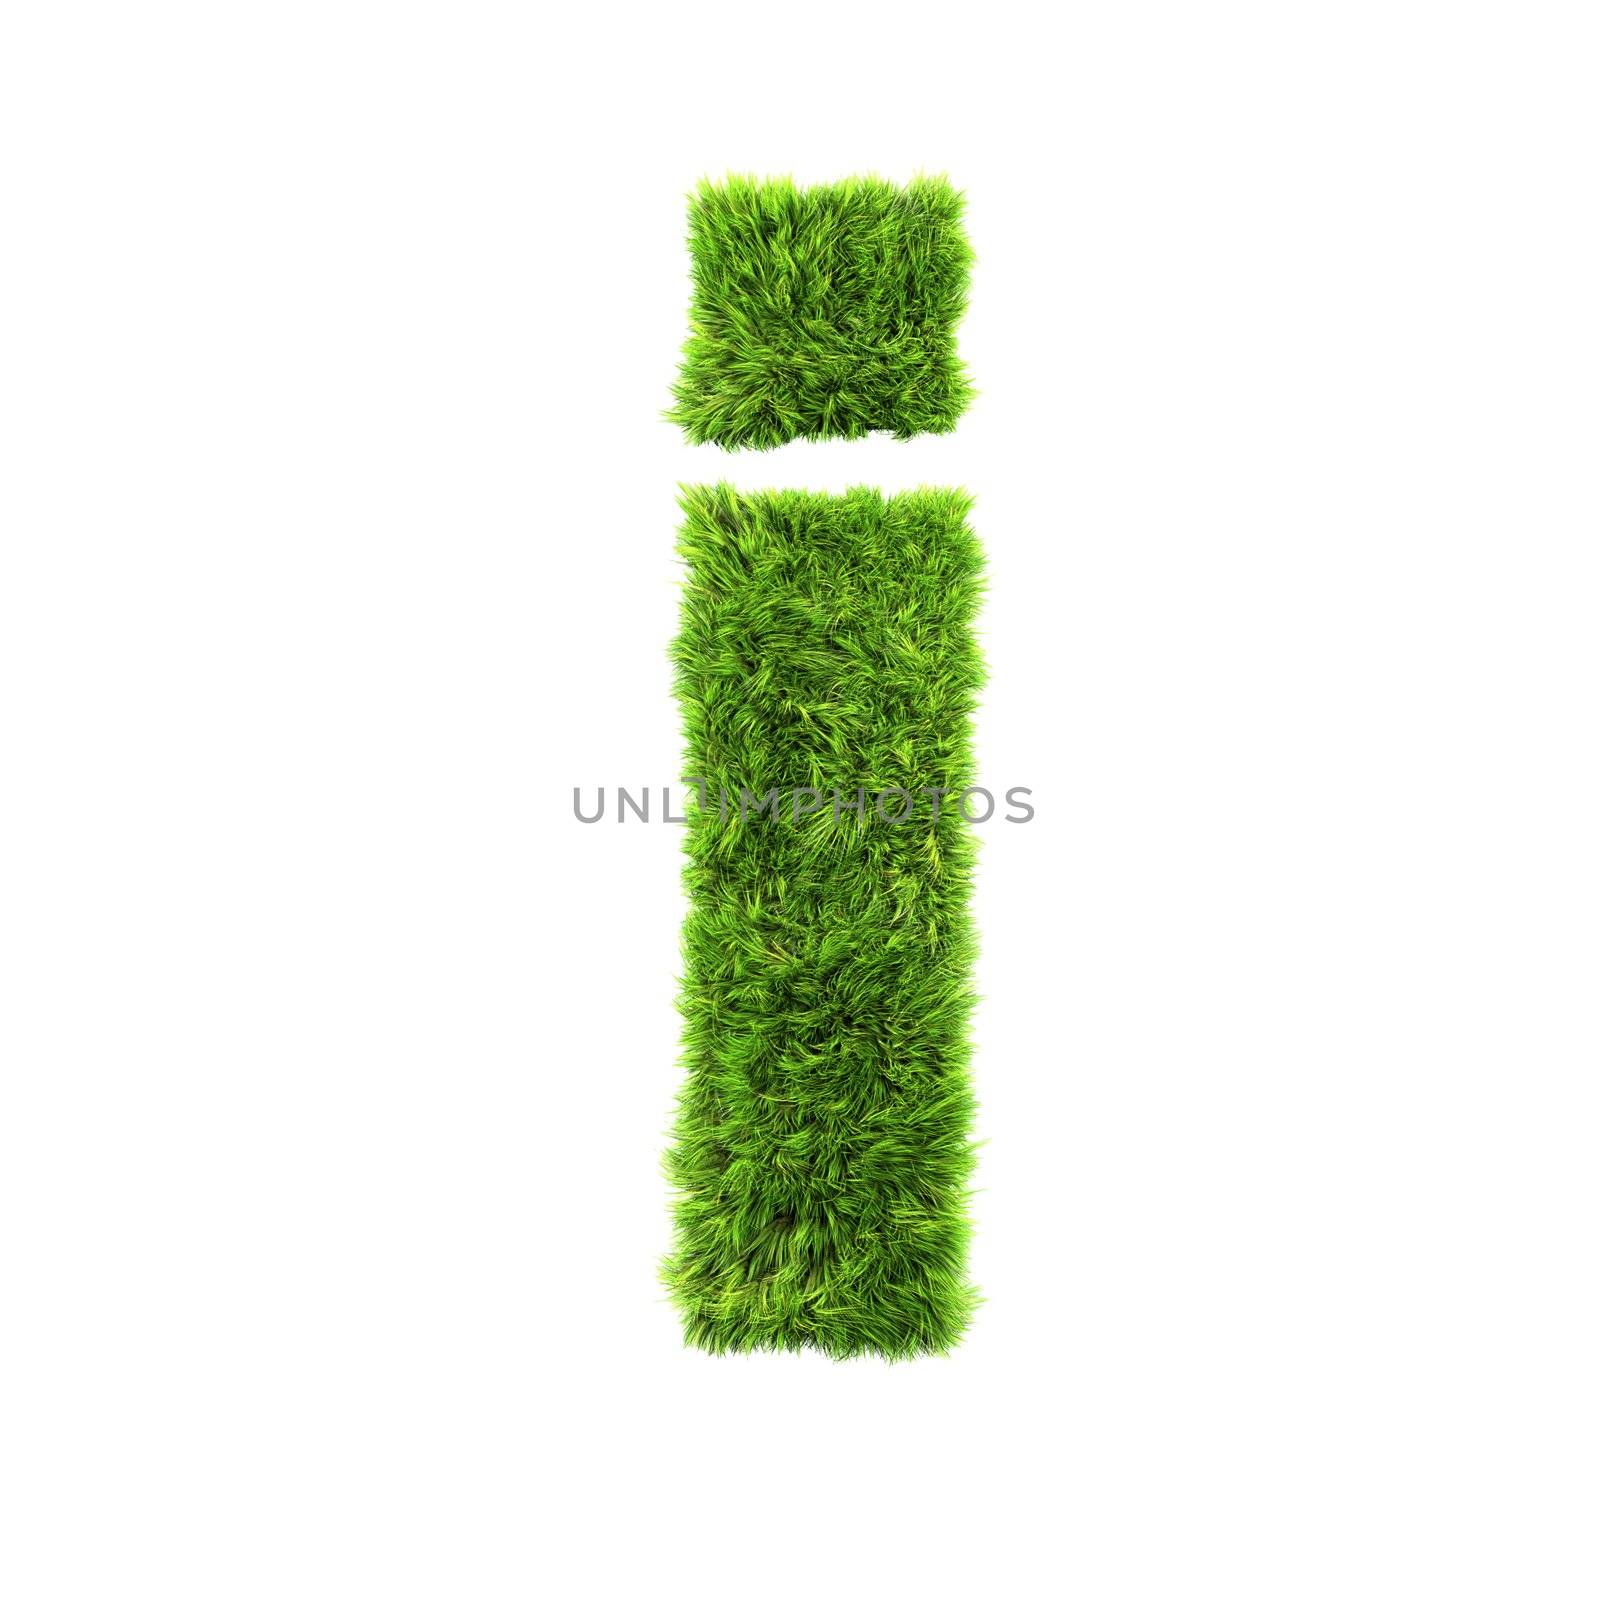 3d grass letter isolated on white background - i by chrisroll